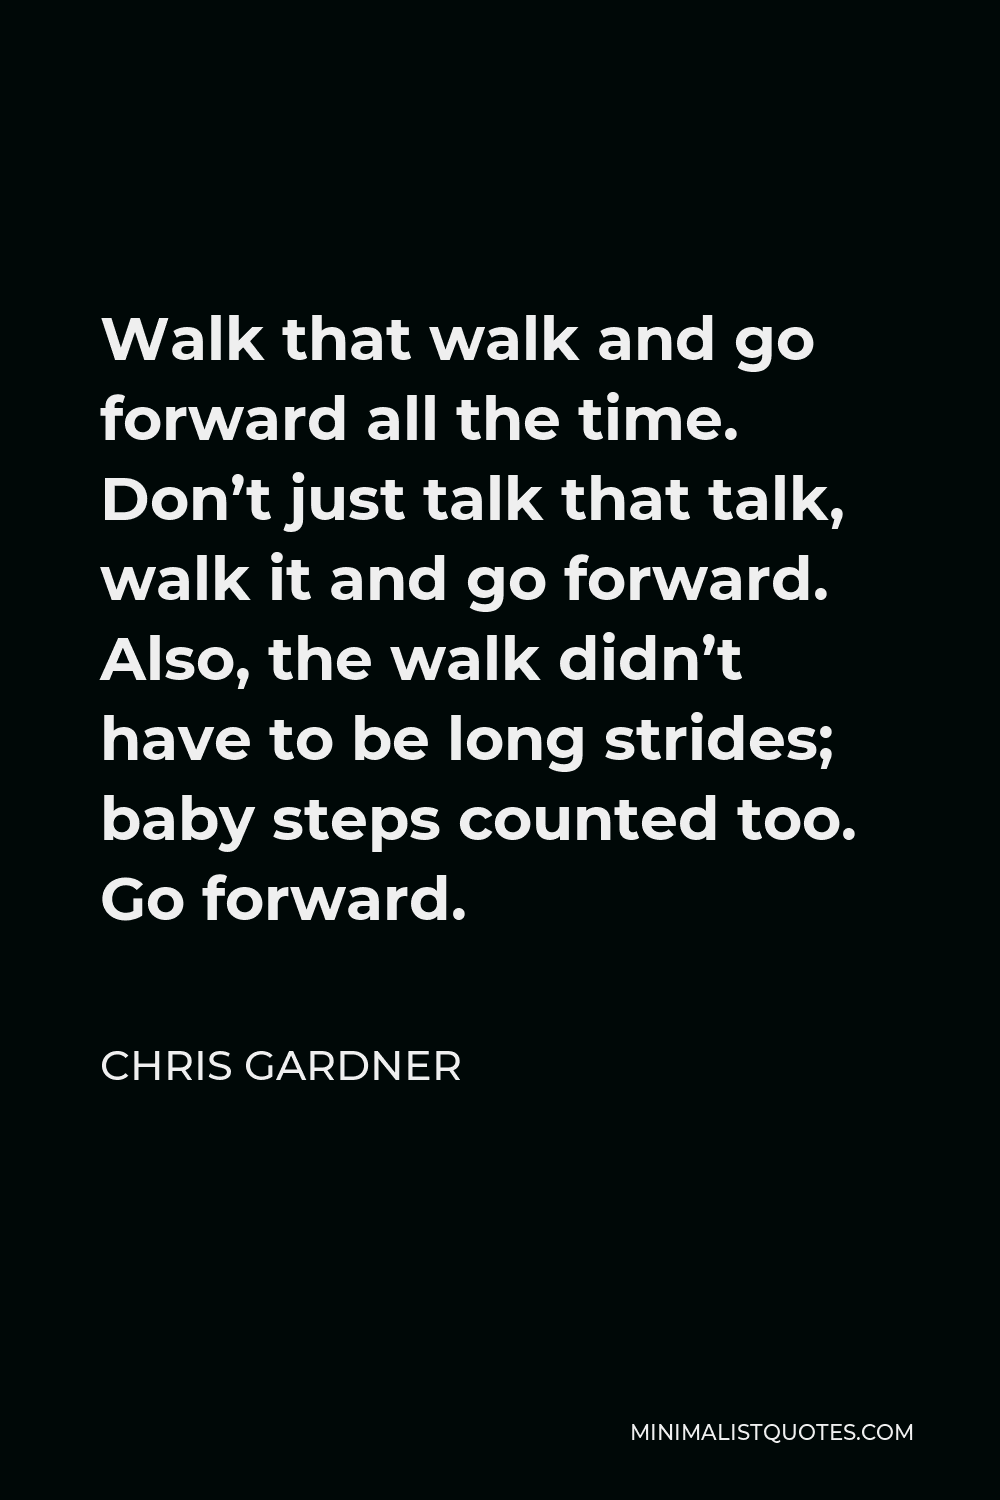 Chris Gardner Quote - Walk that walk and go forward all the time. Don’t just talk that talk, walk it and go forward. Also, the walk didn’t have to be long strides; baby steps counted too. Go forward.